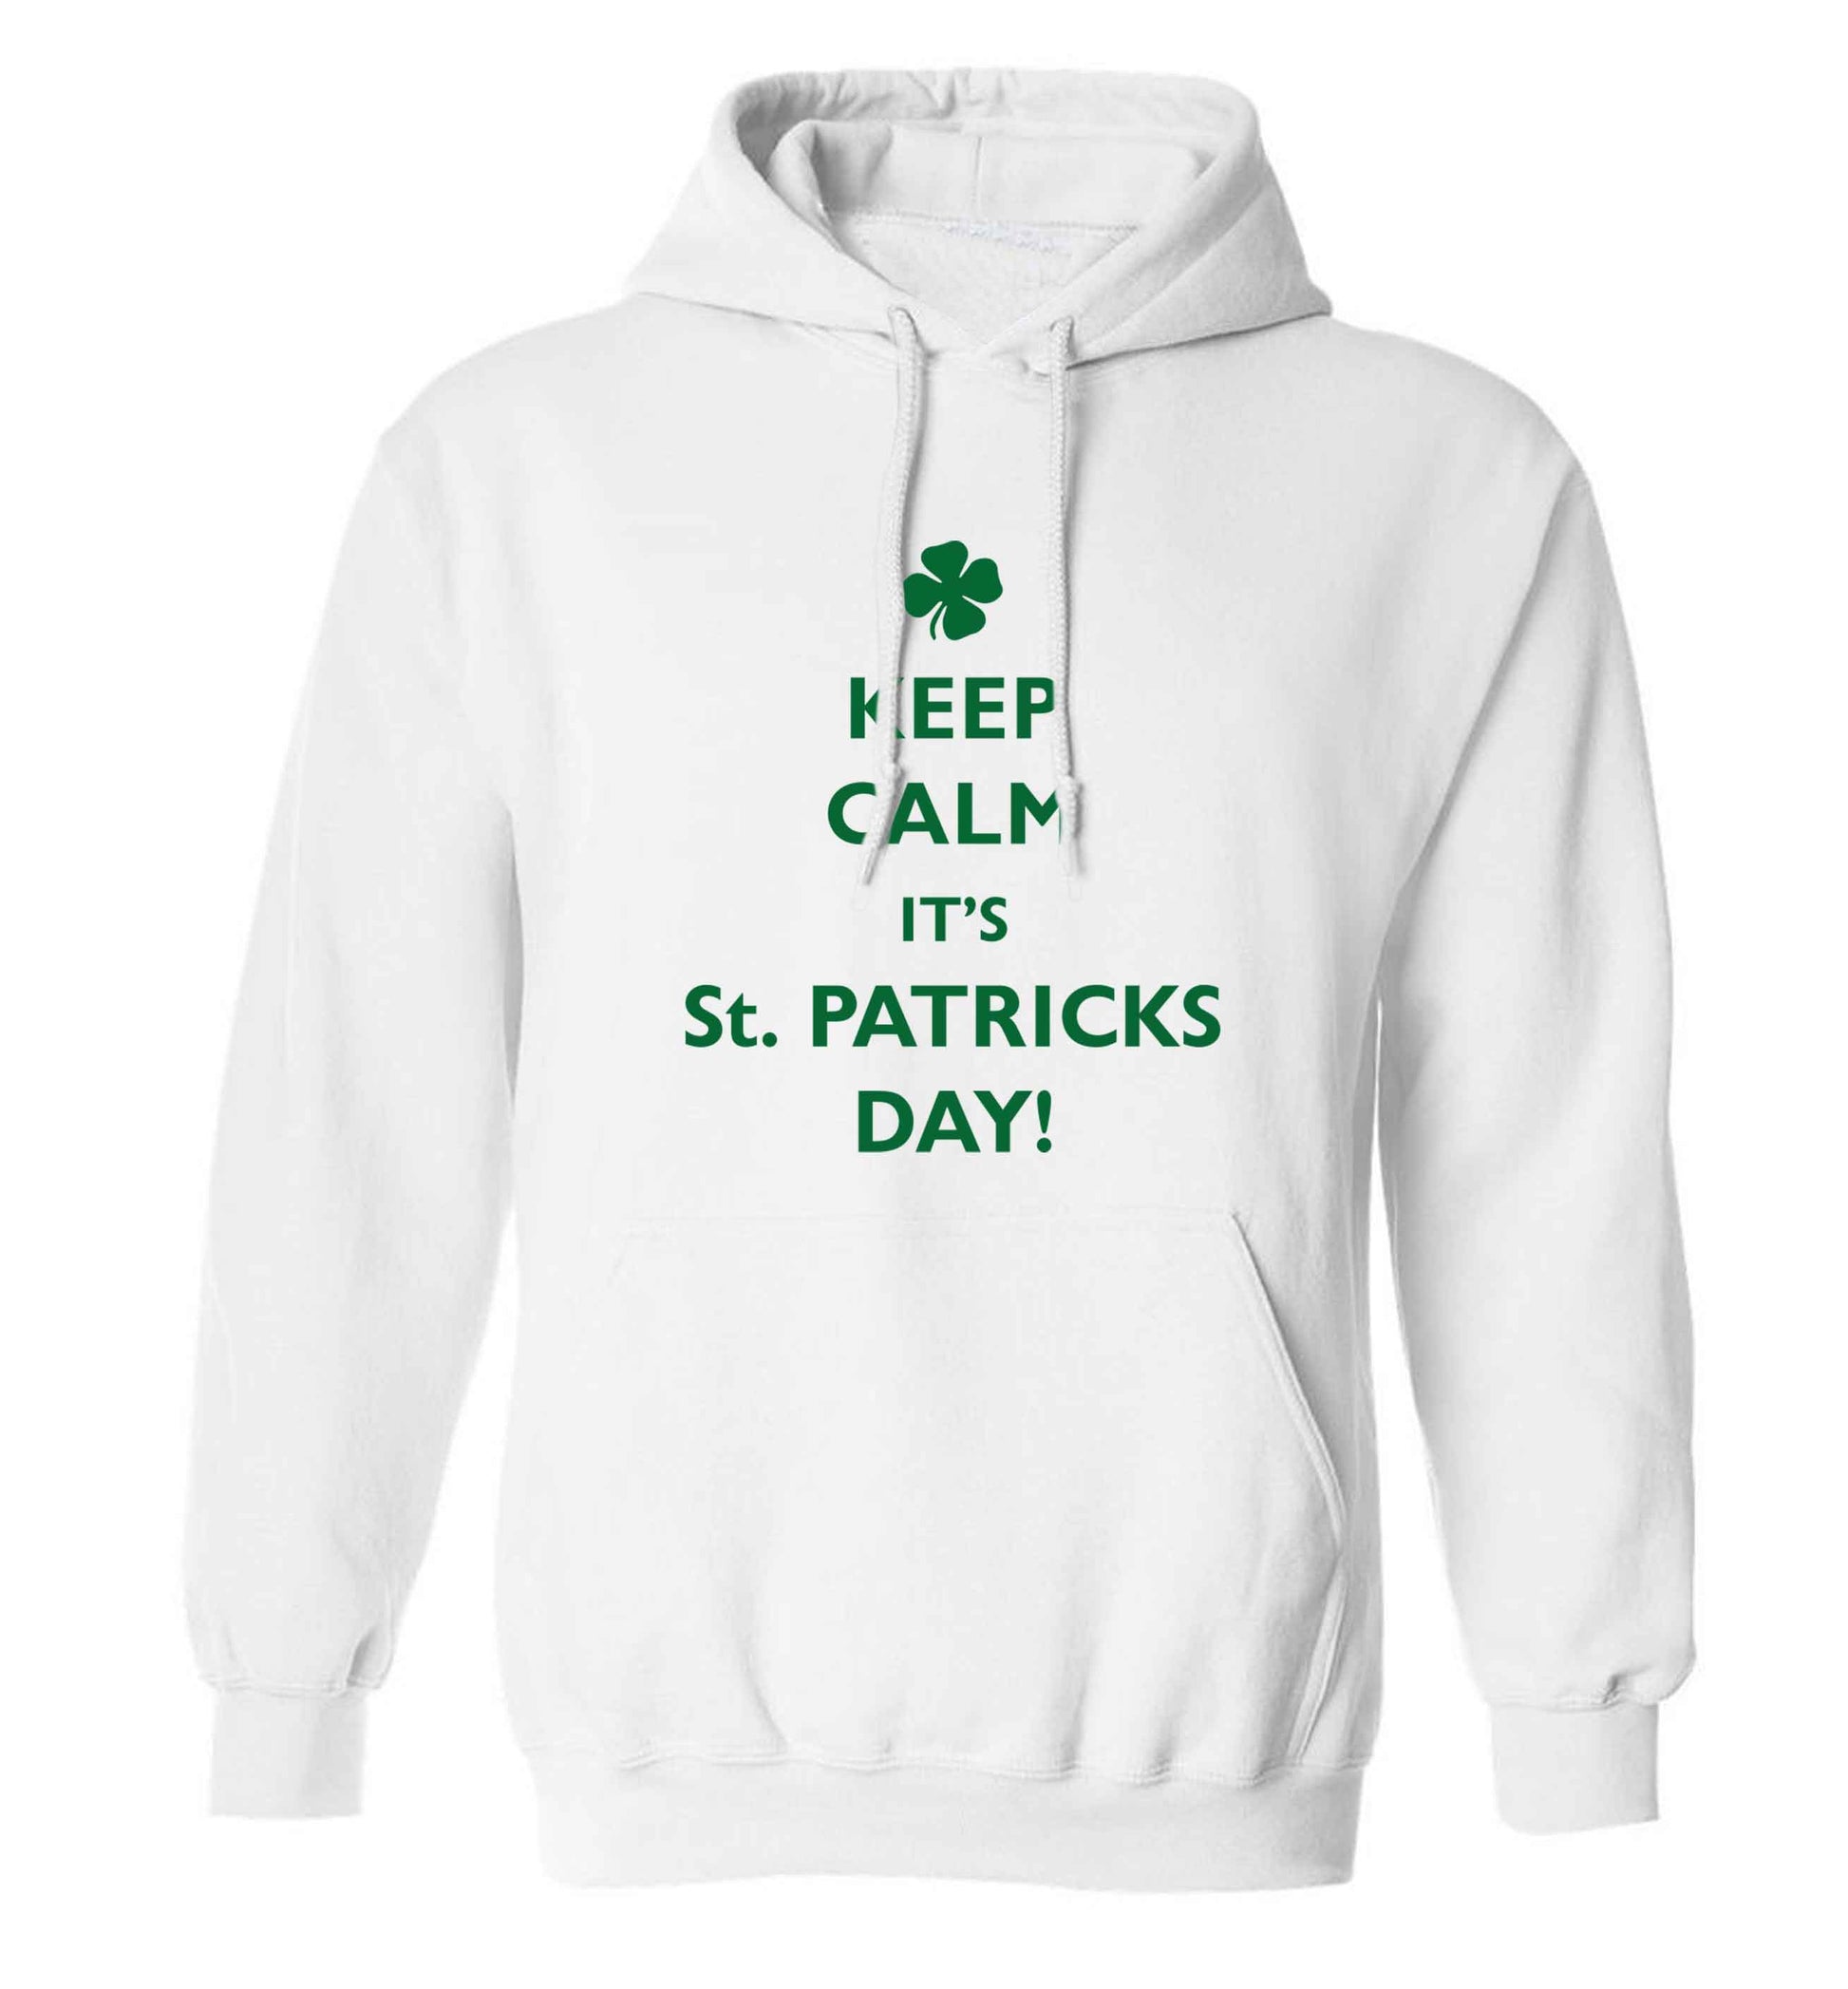 Keep calm it's St.Patricks day adults unisex white hoodie 2XL